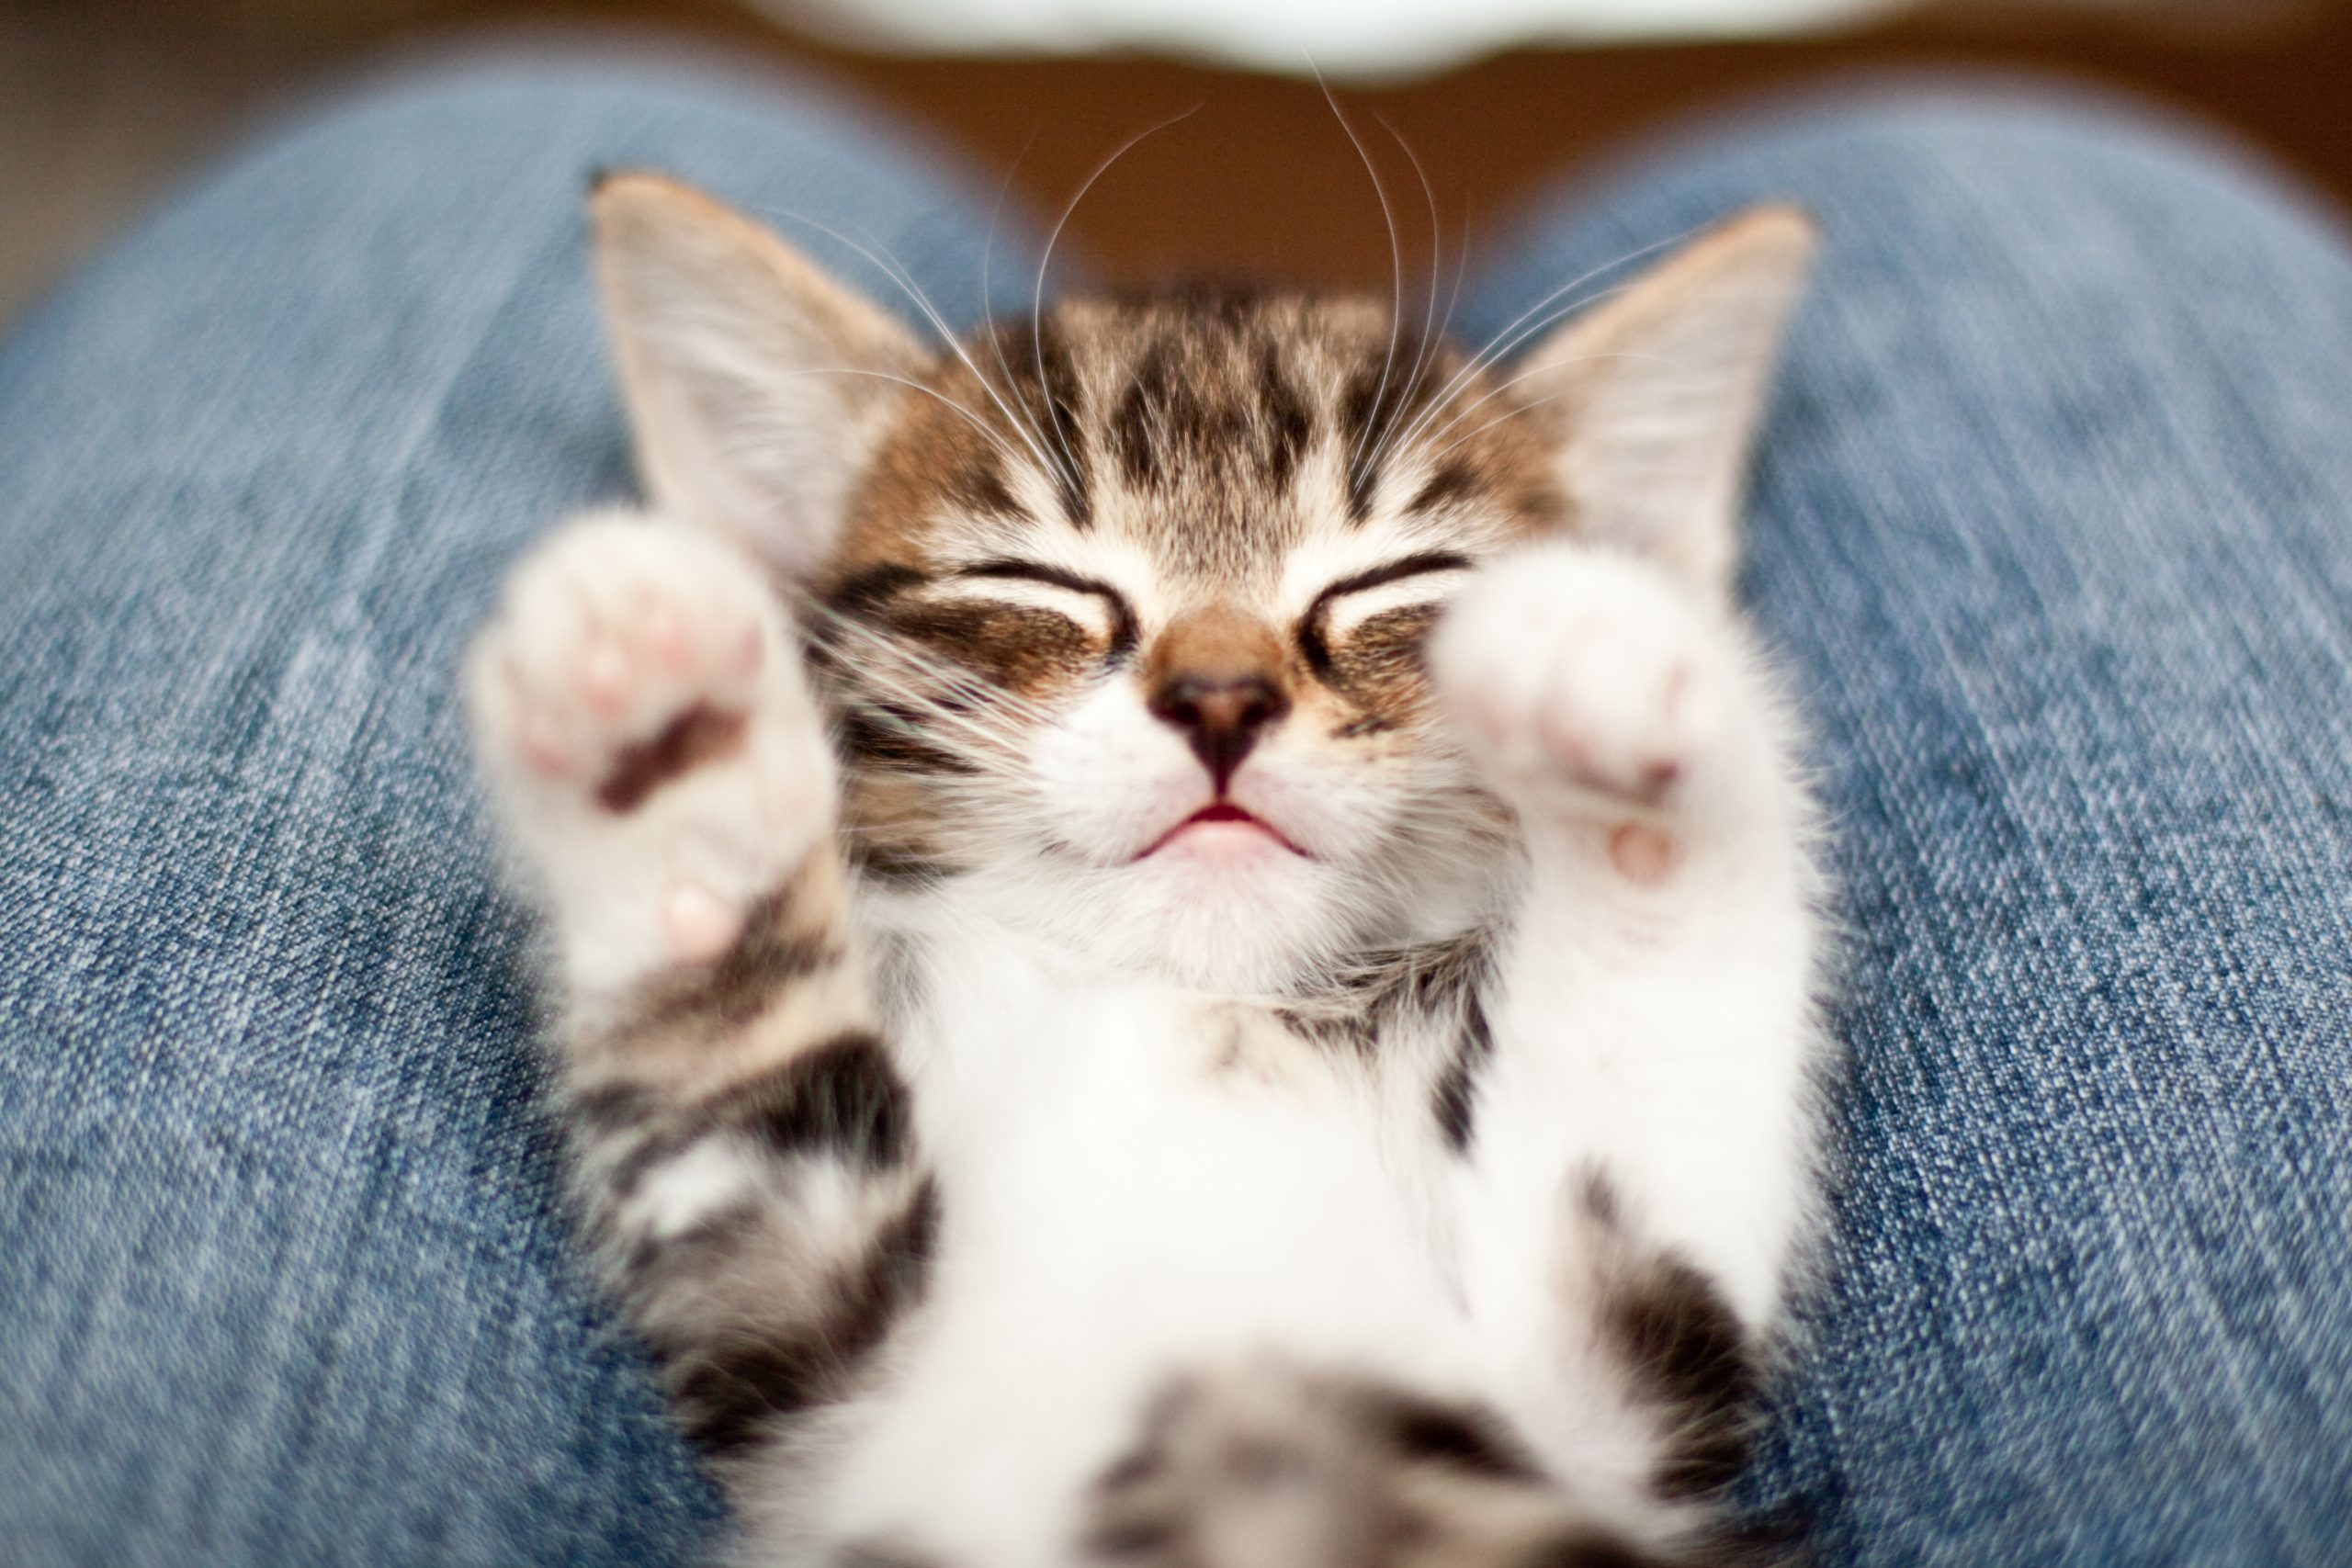 Cute Kittens You Need To See The Cutest Kitten Photos Ever